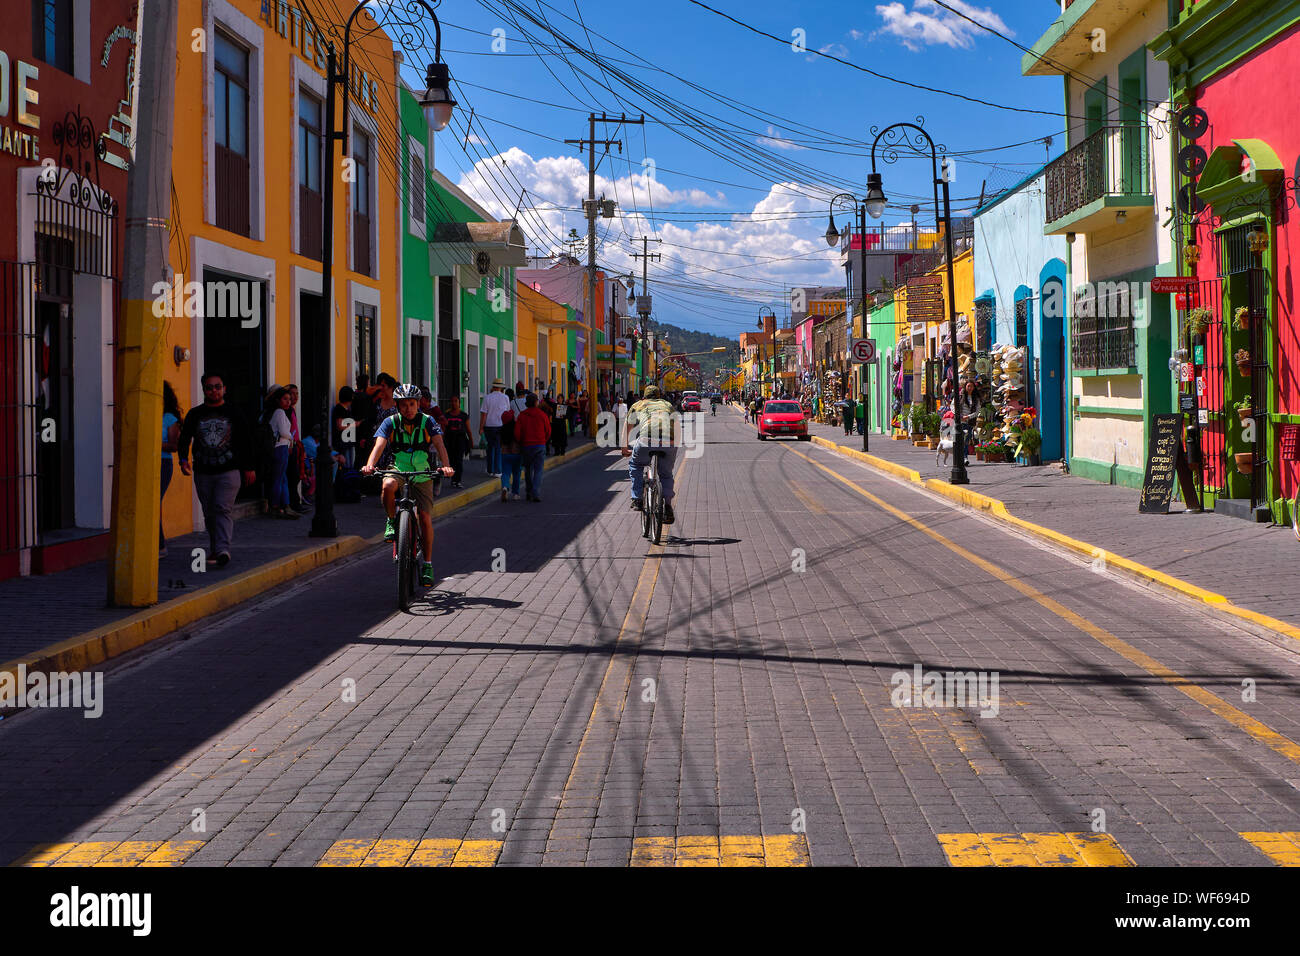 San Pedro Cholula, Mexico, September 30, 2019 - Beautiful Avenida Morelos street with 2 cyclists and tourists at sunny day, traditional clothing and souvenir shops with vibrant colored facades. Stock Photo